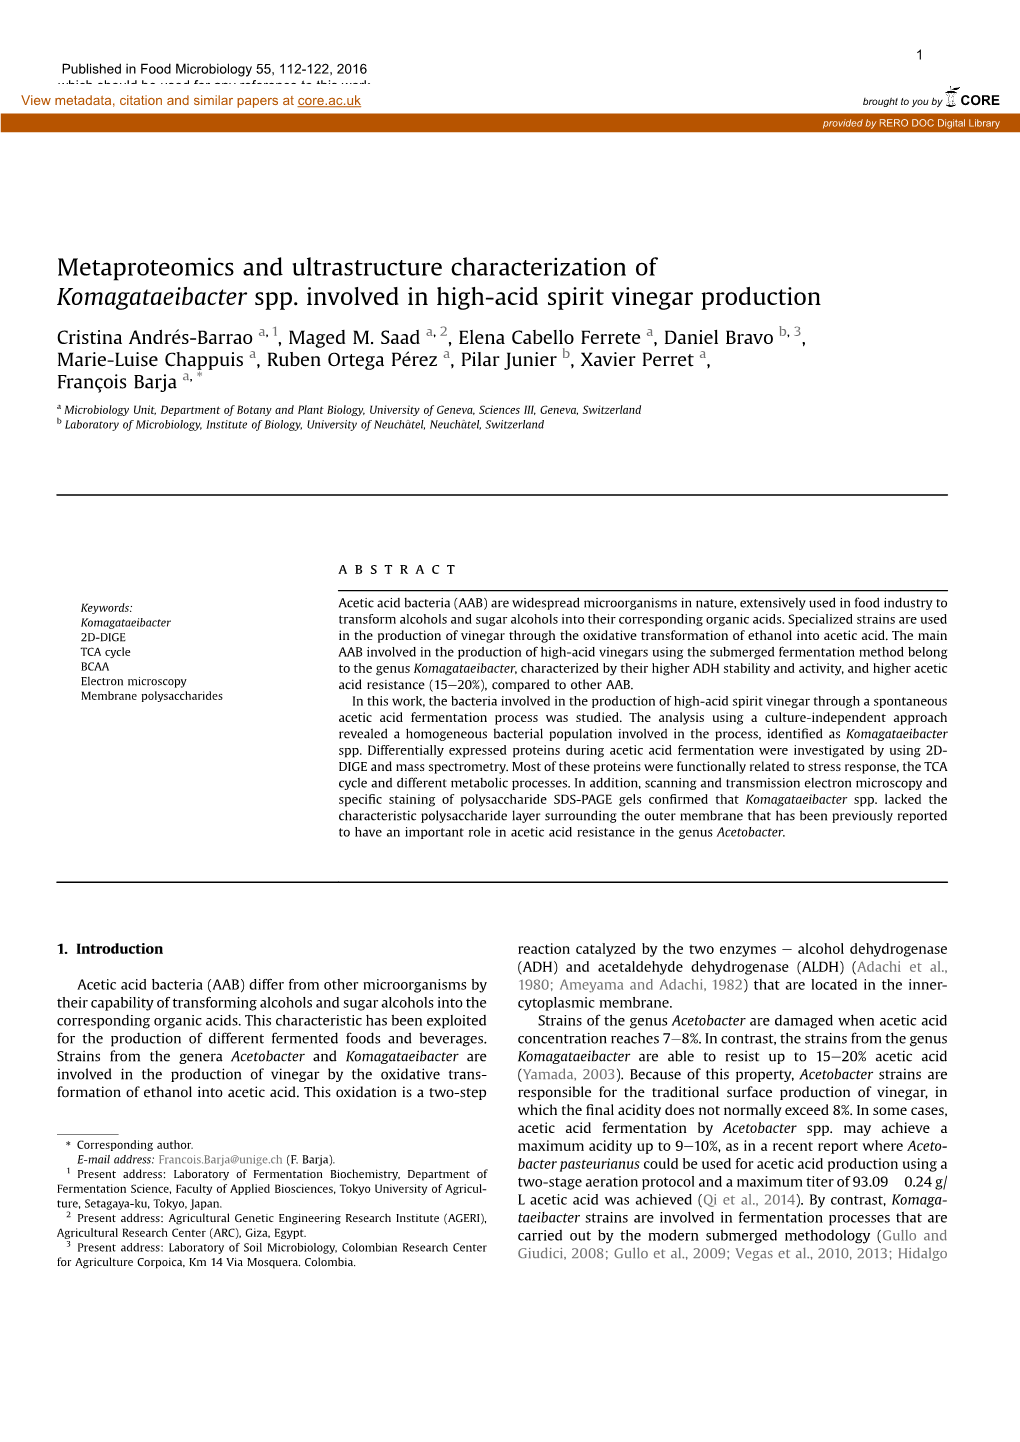 Metaproteomics and Ultrastructure Characterization of Komagataeibacter Spp